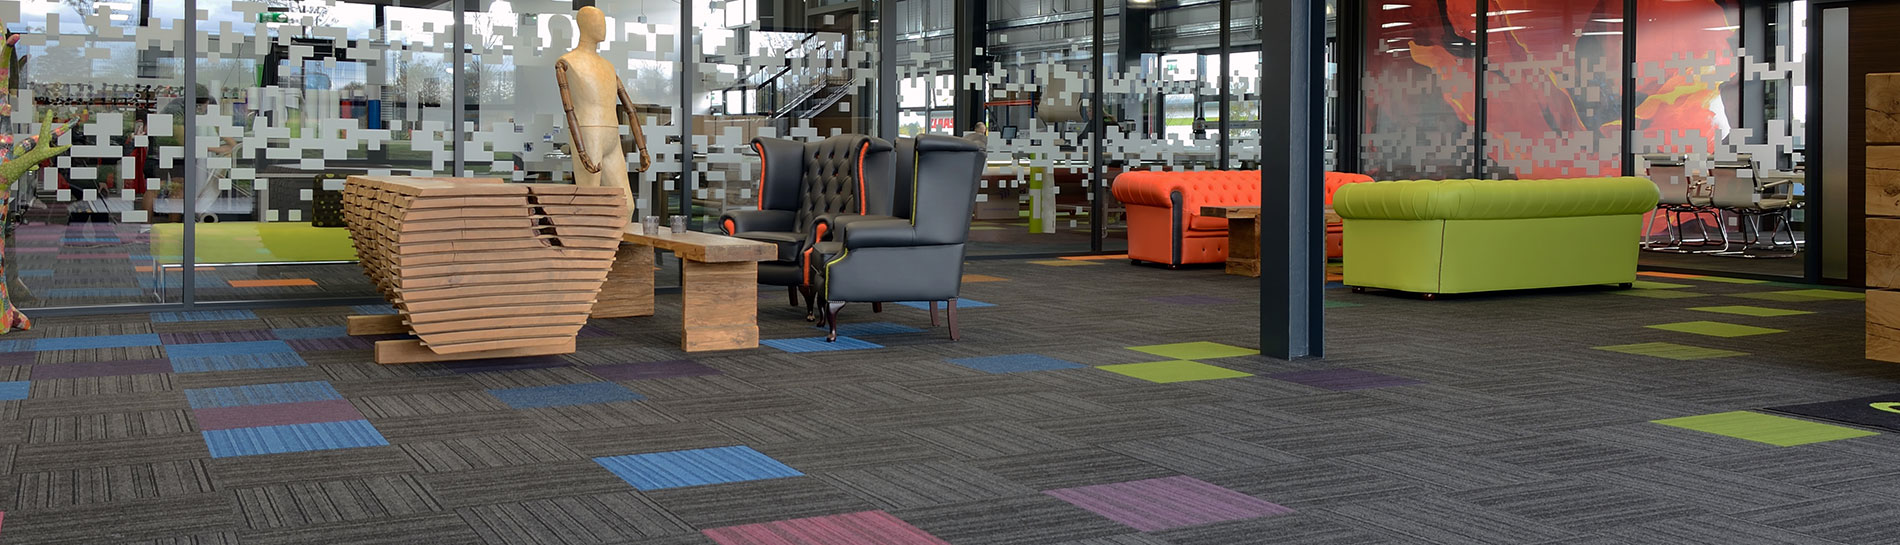 Carpet Tiles for Education Campuses